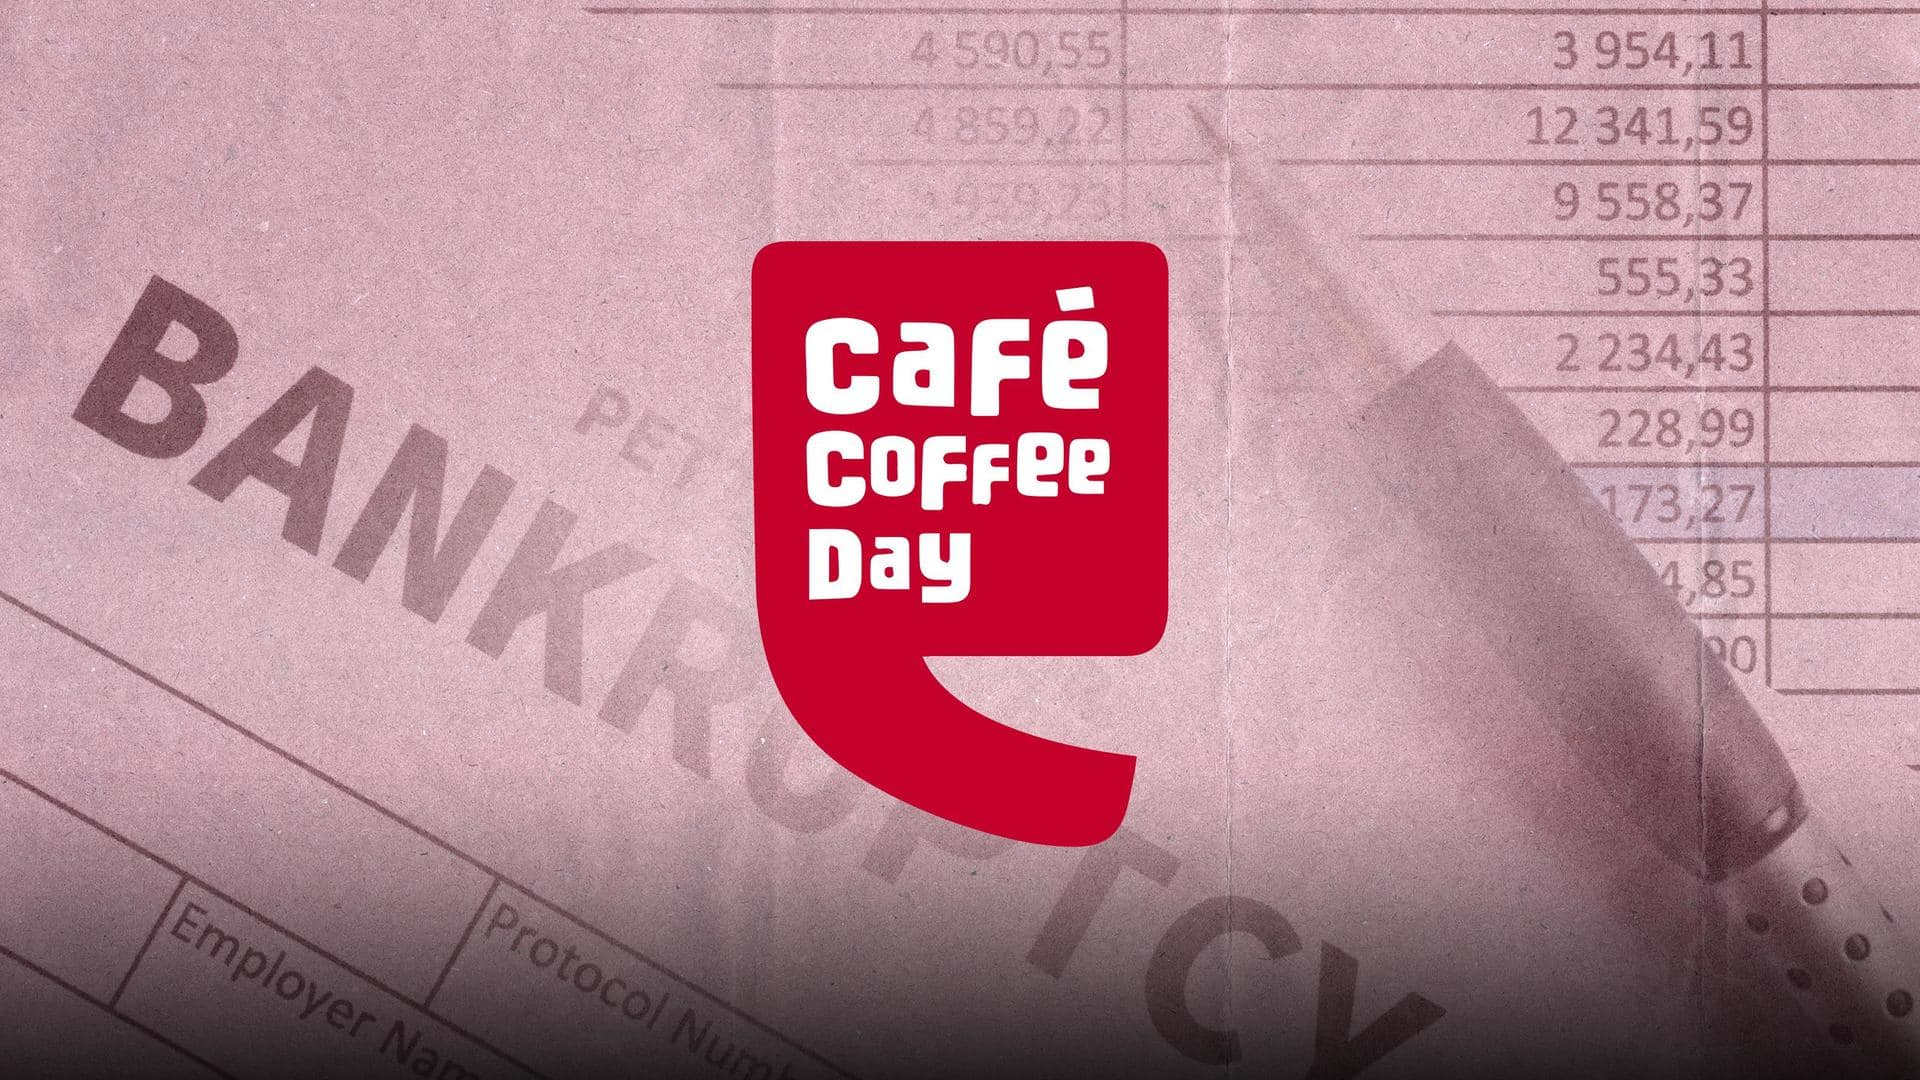 CCD Timings Opening & Closing Details | Check Deals, Offers